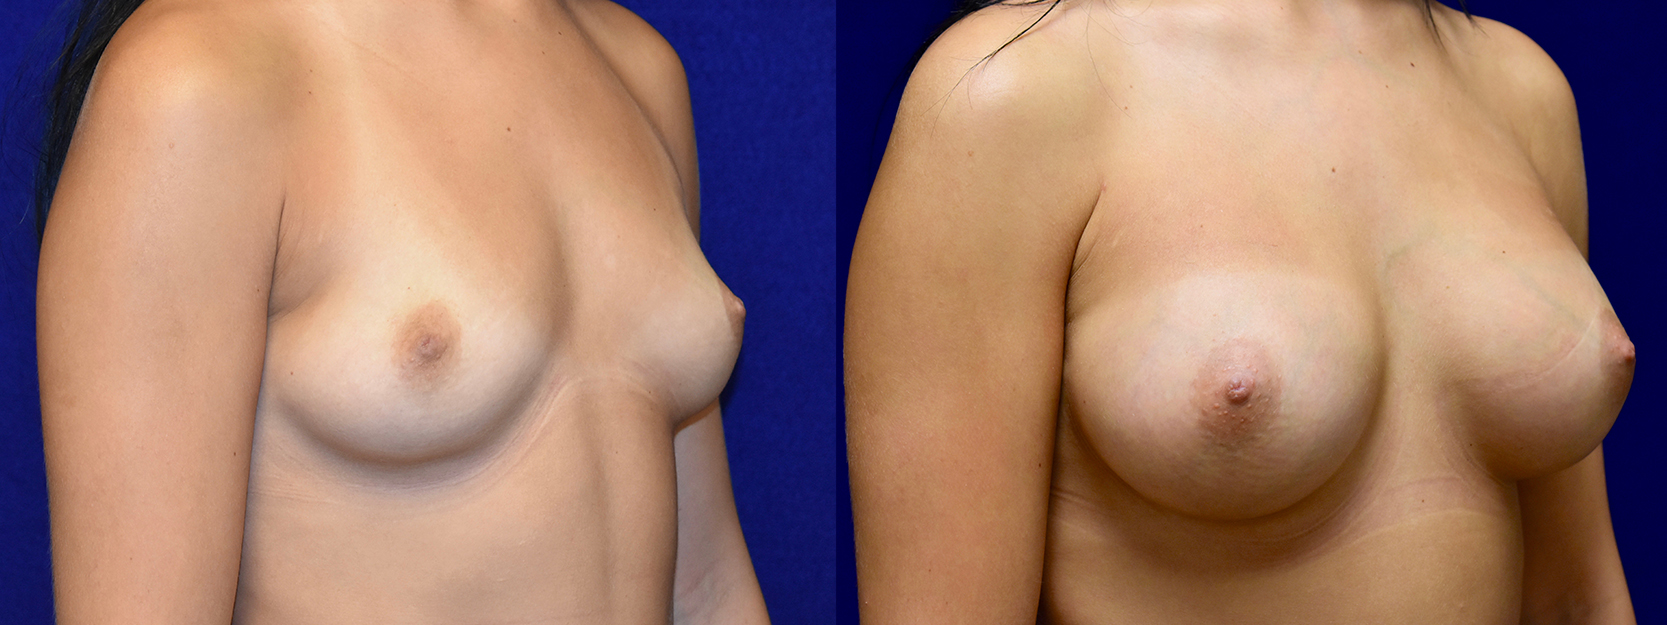 Right 3/4 View - Breast Augmentation